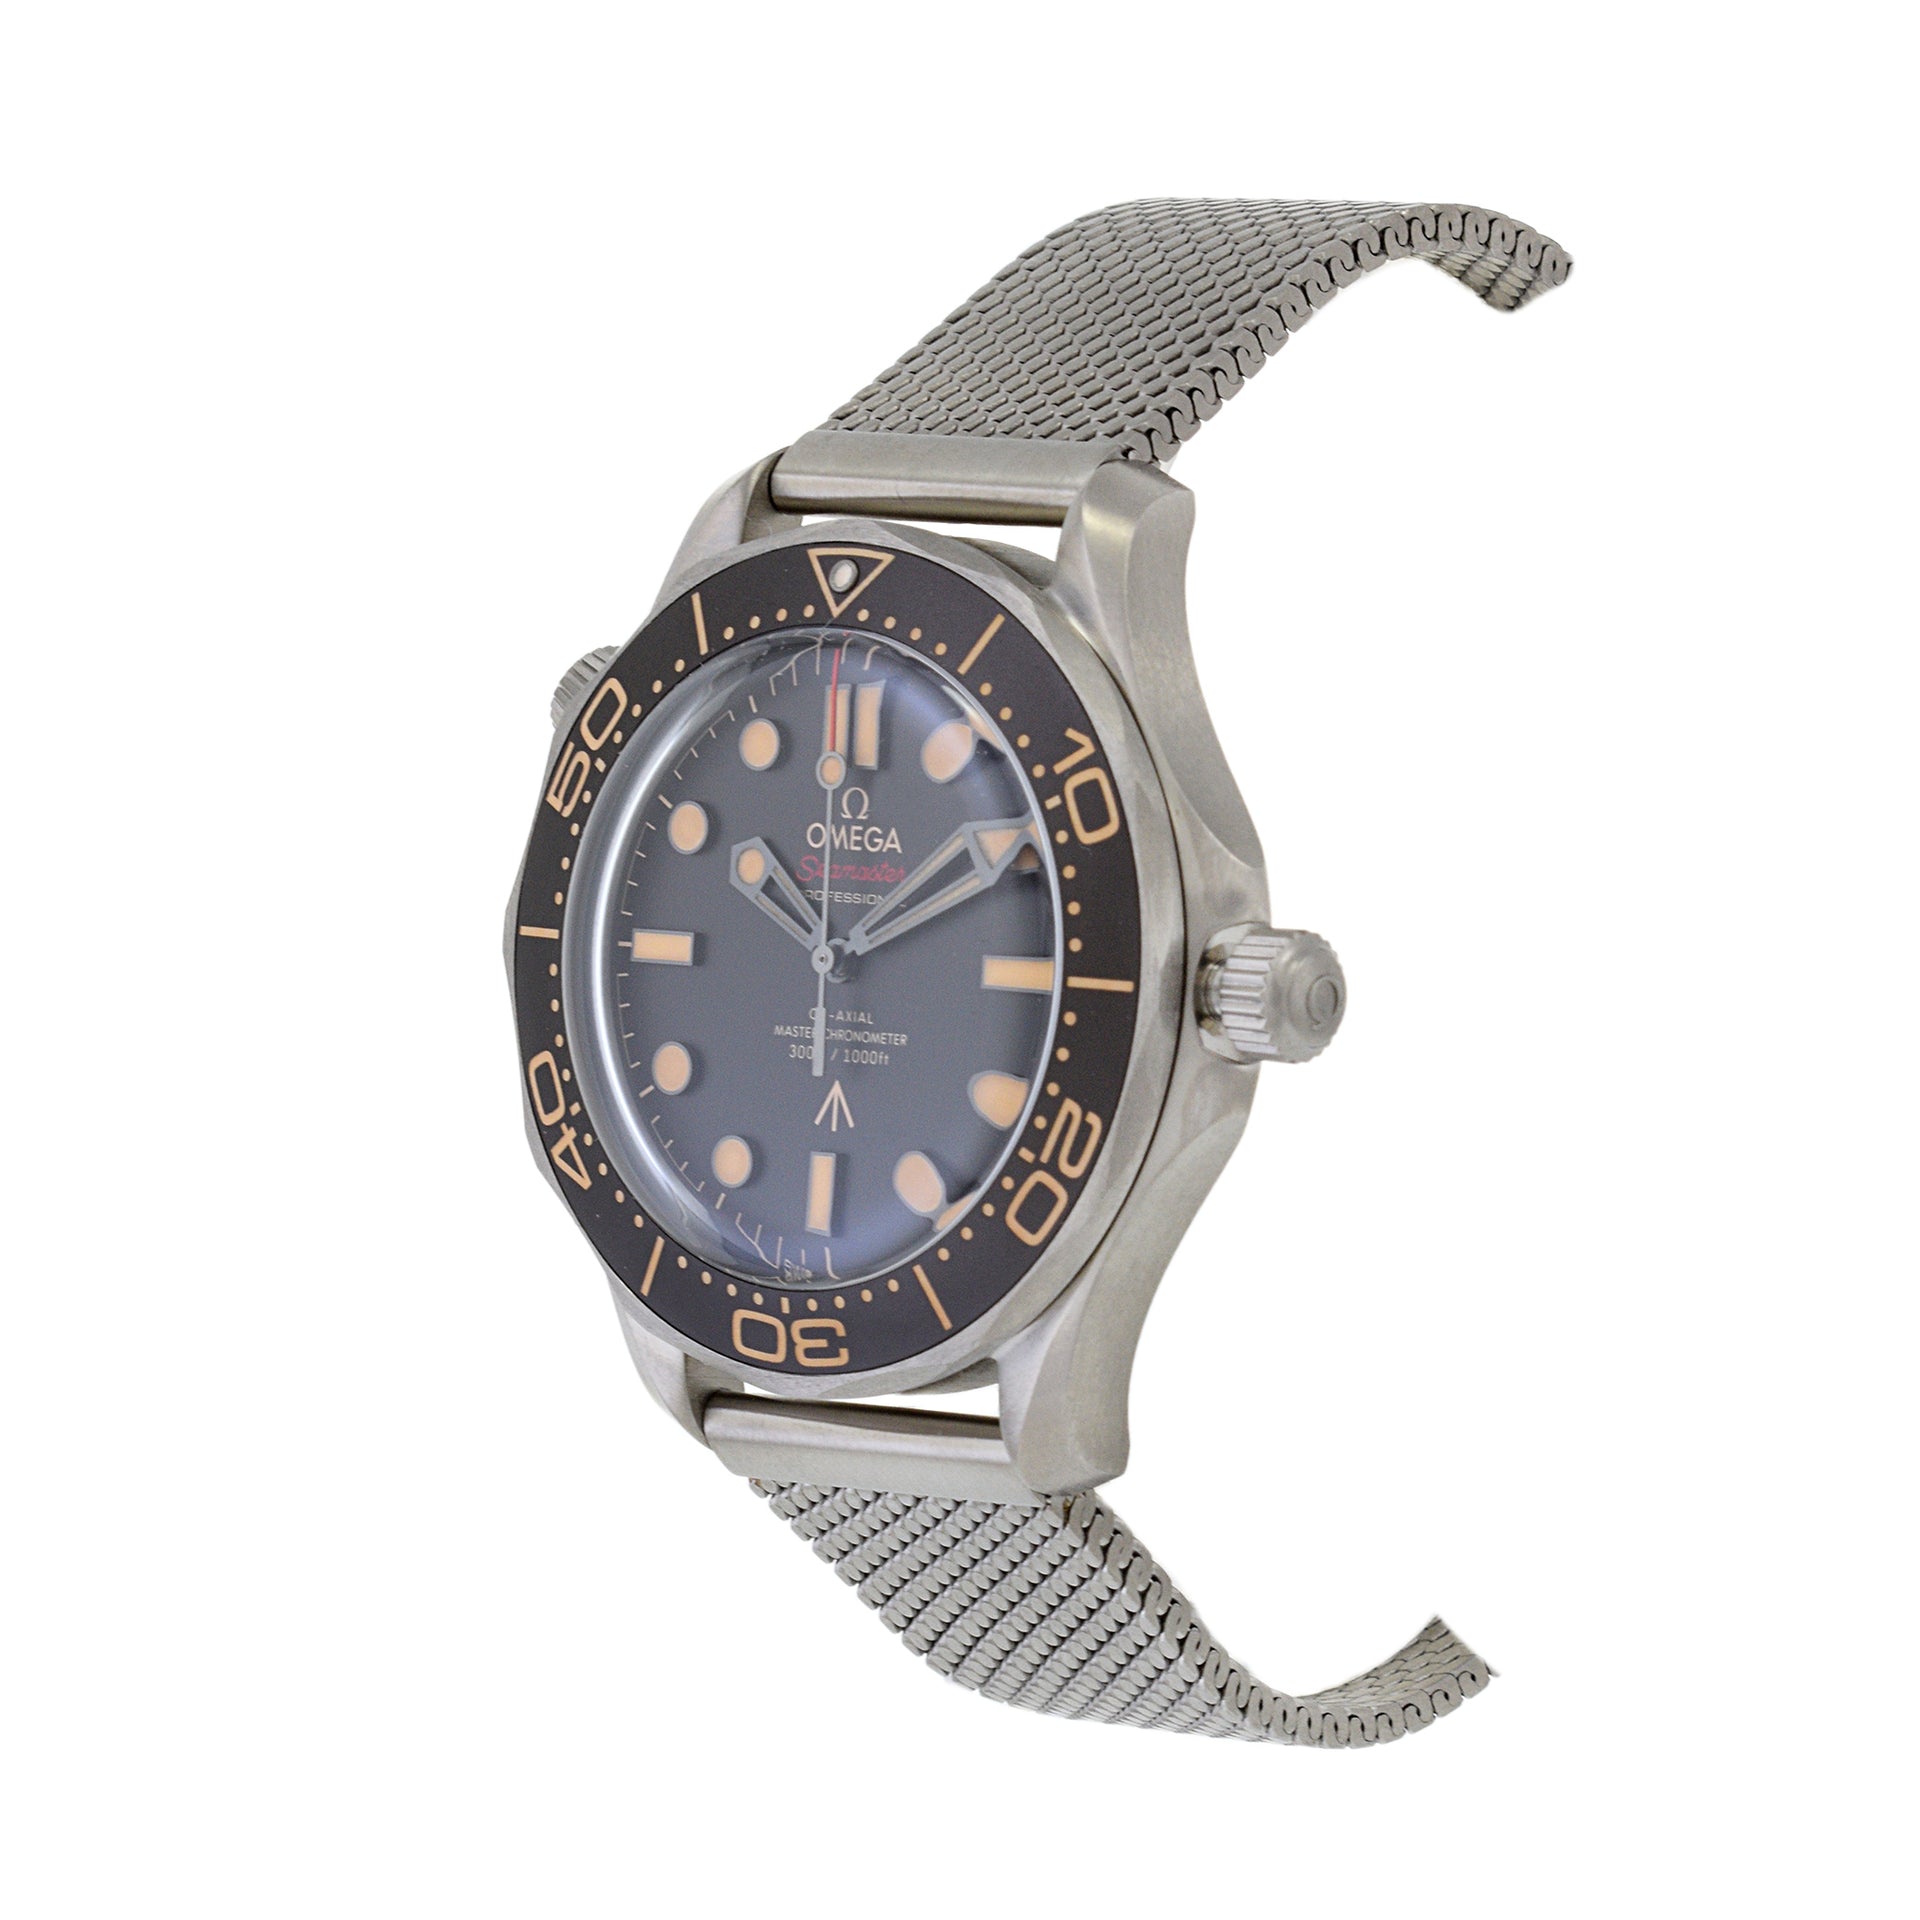 Omega Seamaster Diver Titanium 007 Special Edition Reference 210.90.42.20.01.001